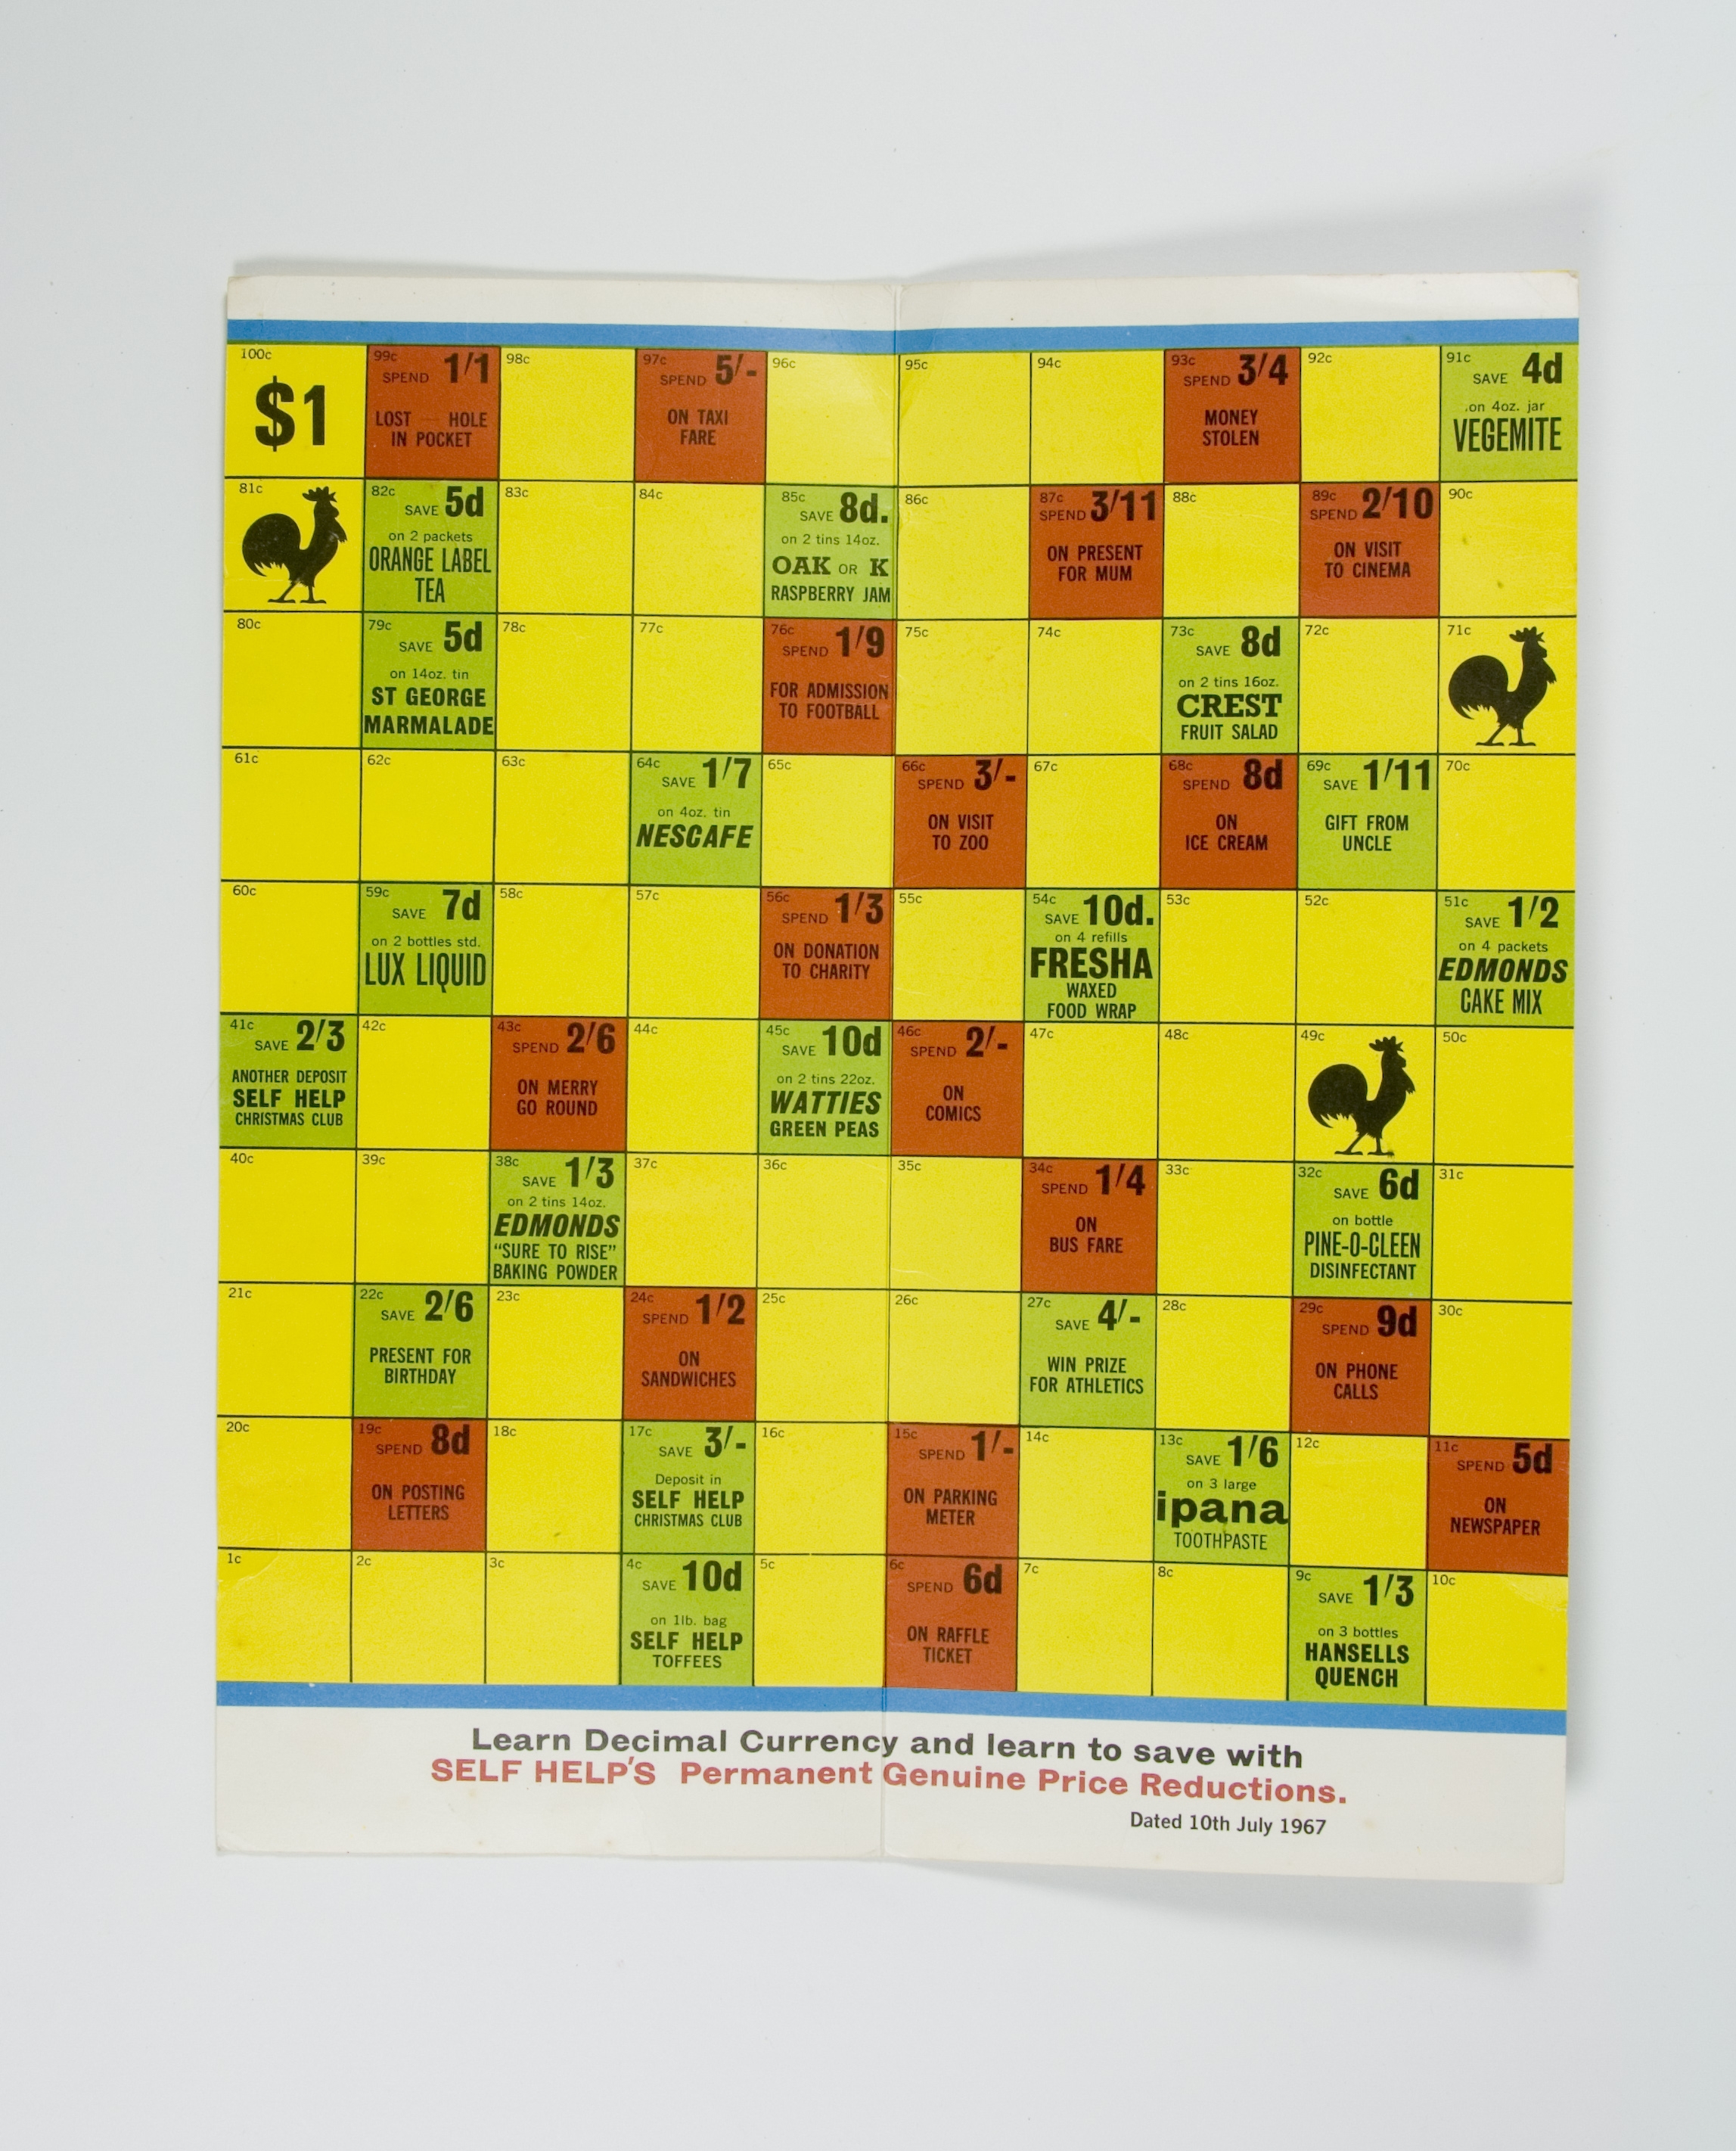 The chequered playing board